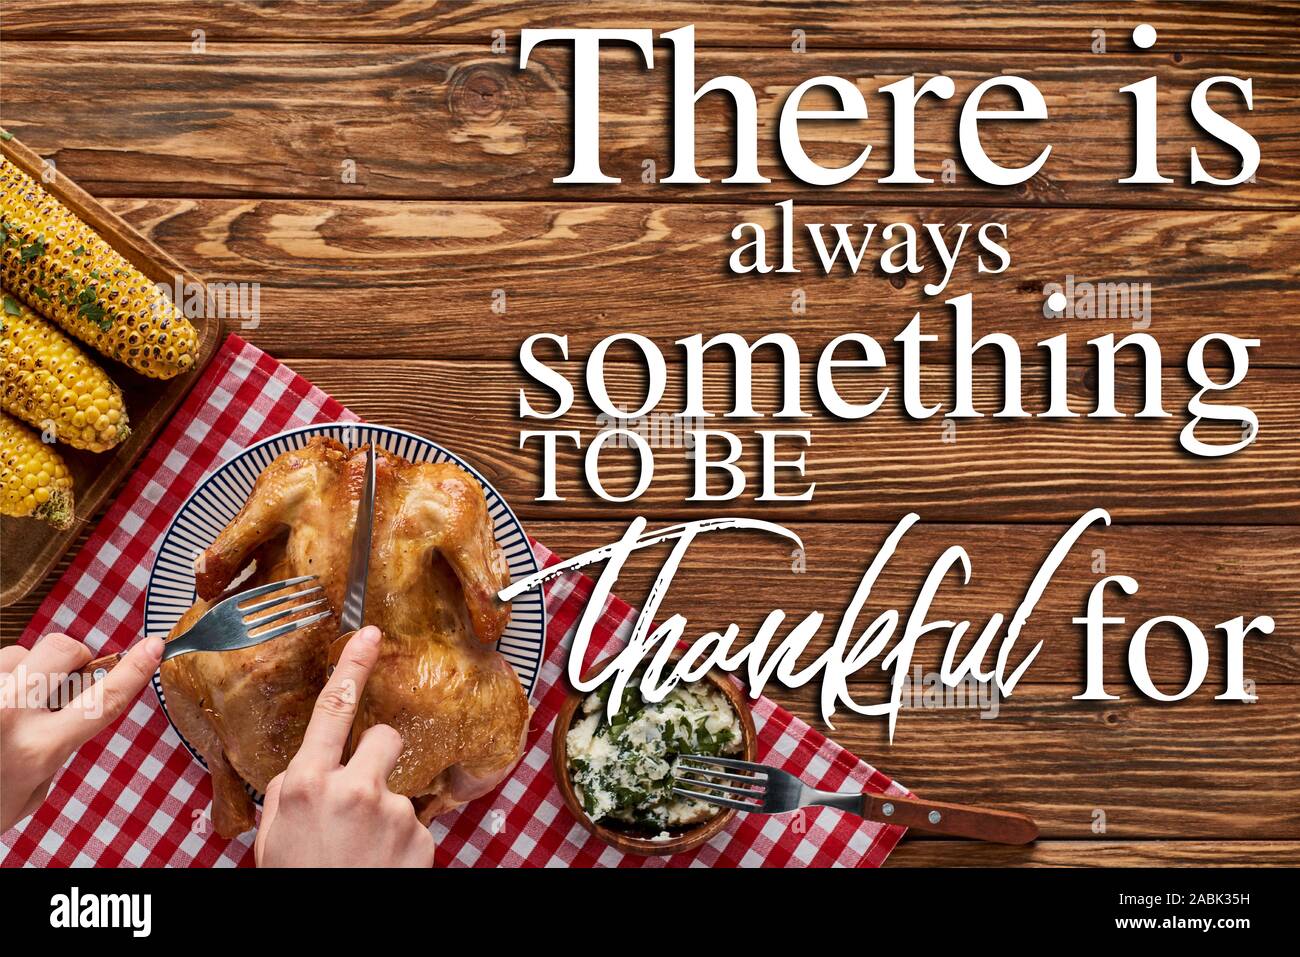 cropped view of woman cutting roasted turkey on red plaid napkin near grilled corn on wooden table with there is always something to be thankful for l Stock Photo